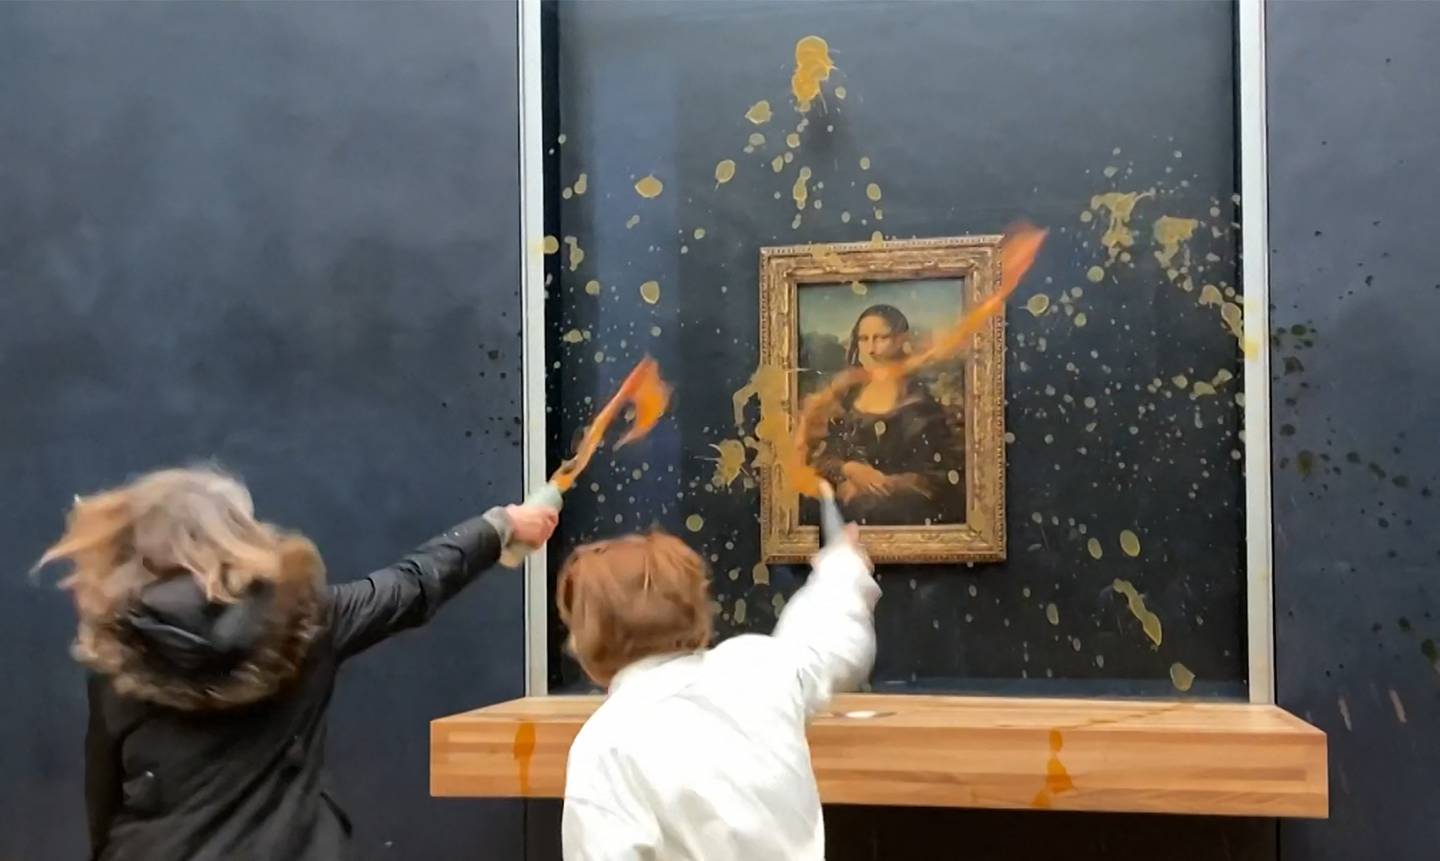 Environmental activists threw soup on the Mona Lisa artwork at the Louvre Museum.